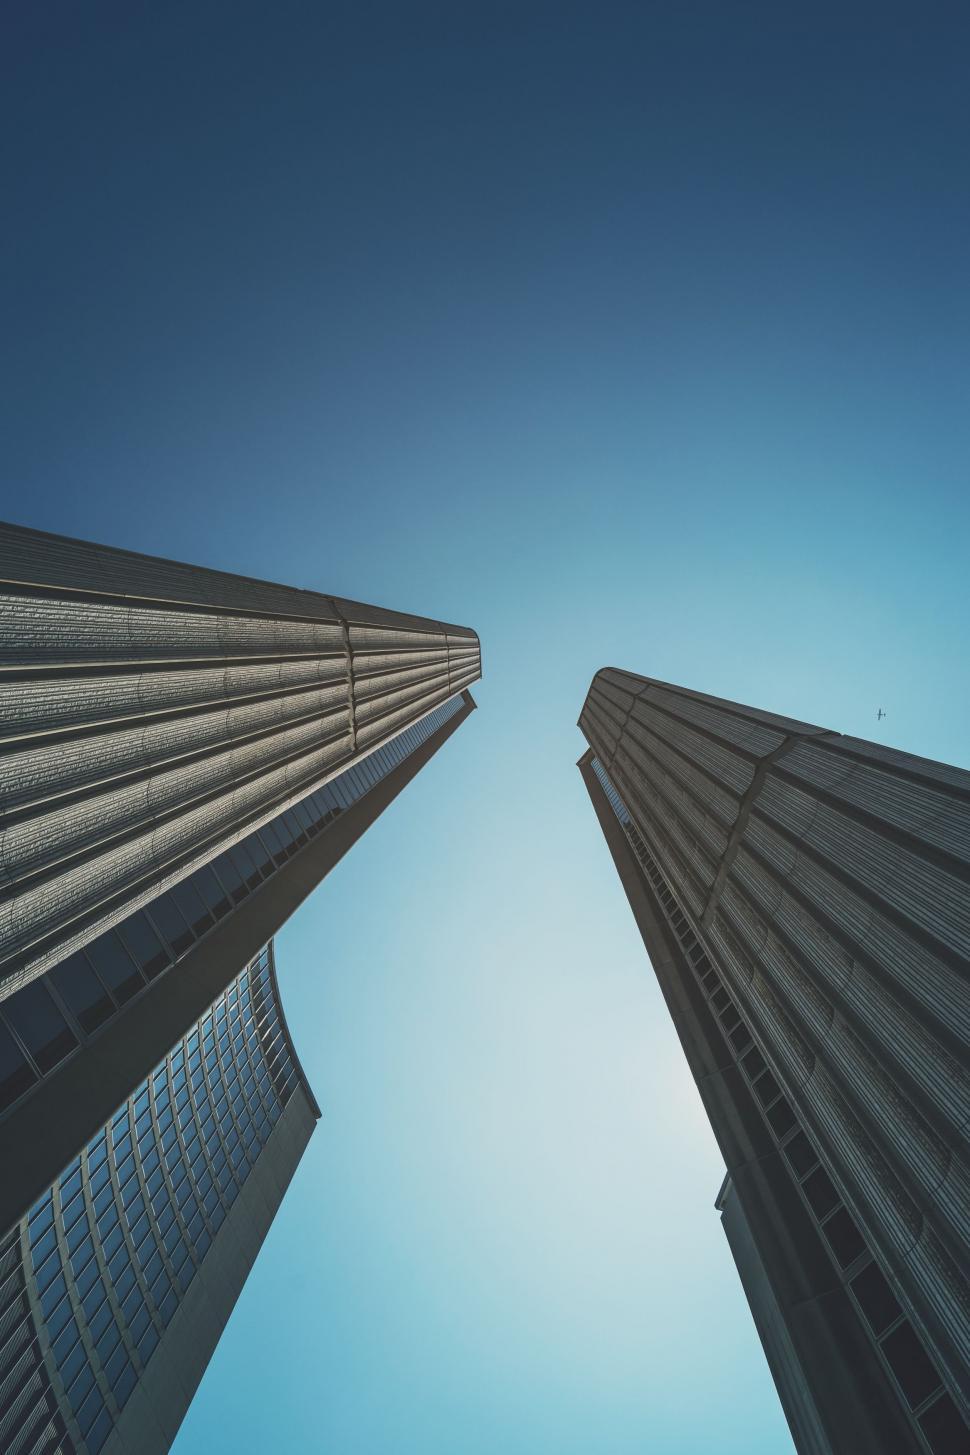 Free Image of Looking up at Two Tall Buildings 